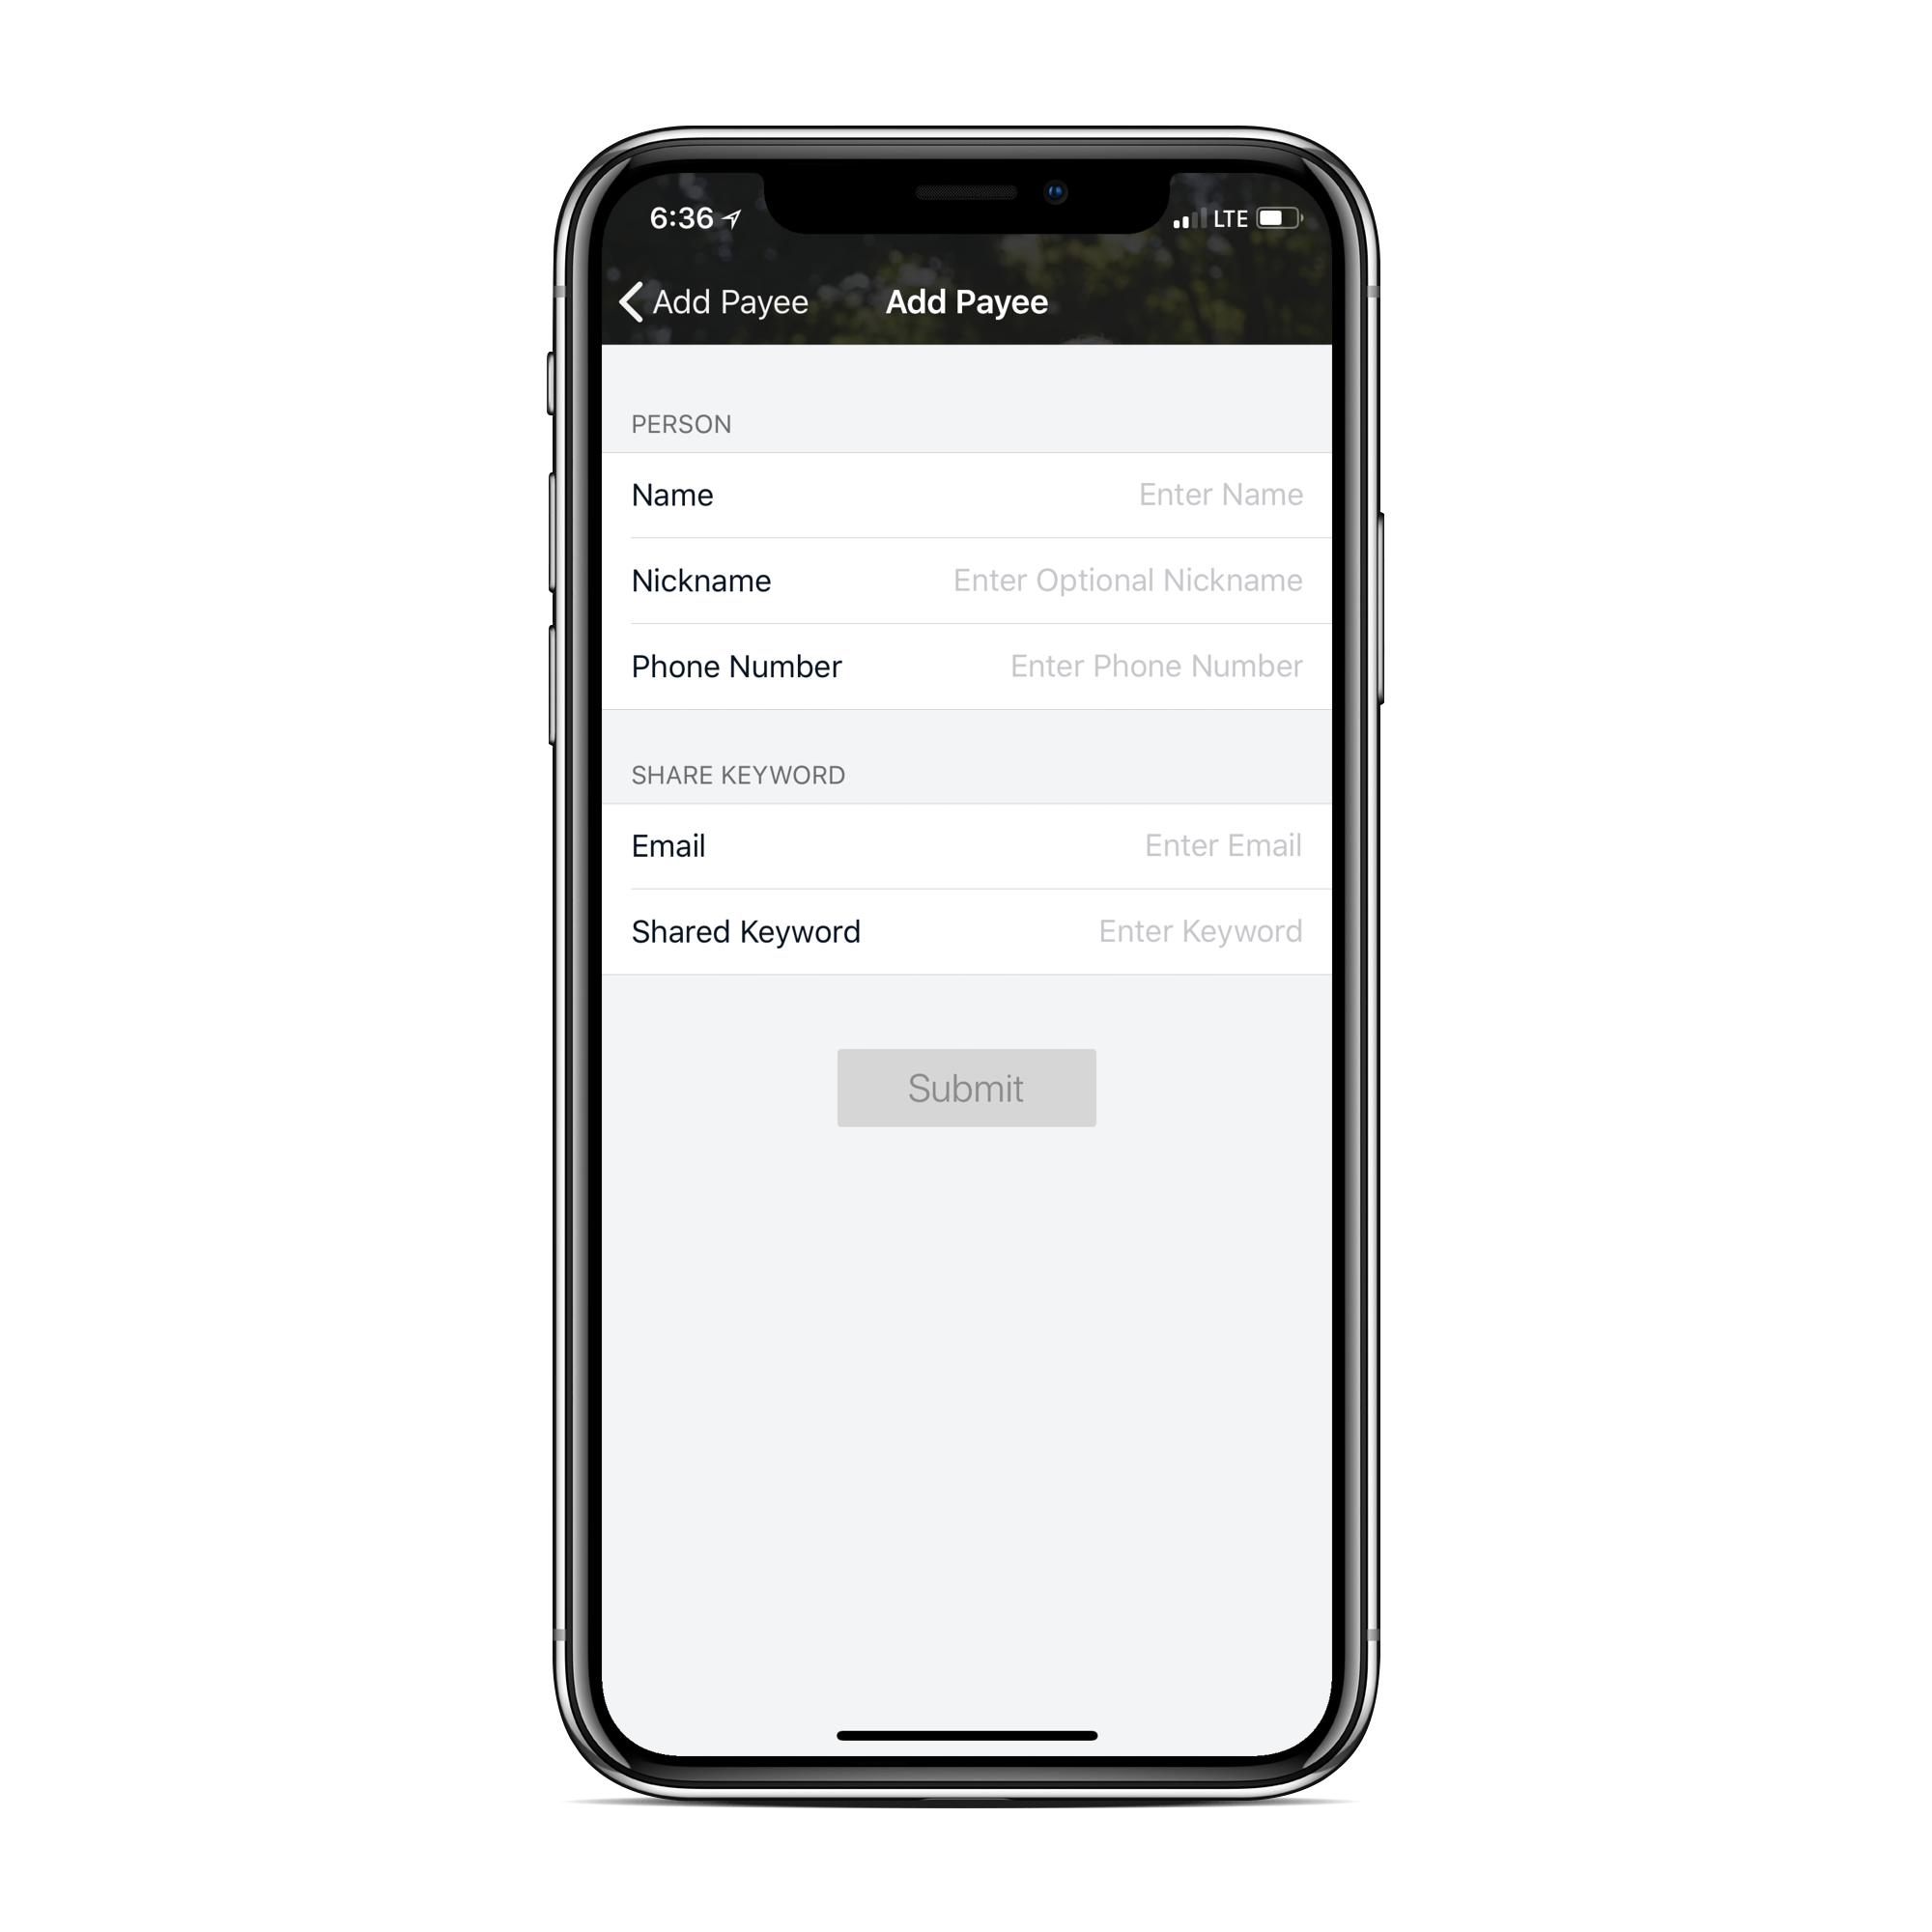 Orrstown Bank mobile banking app add payee screen on space grey iPhone X